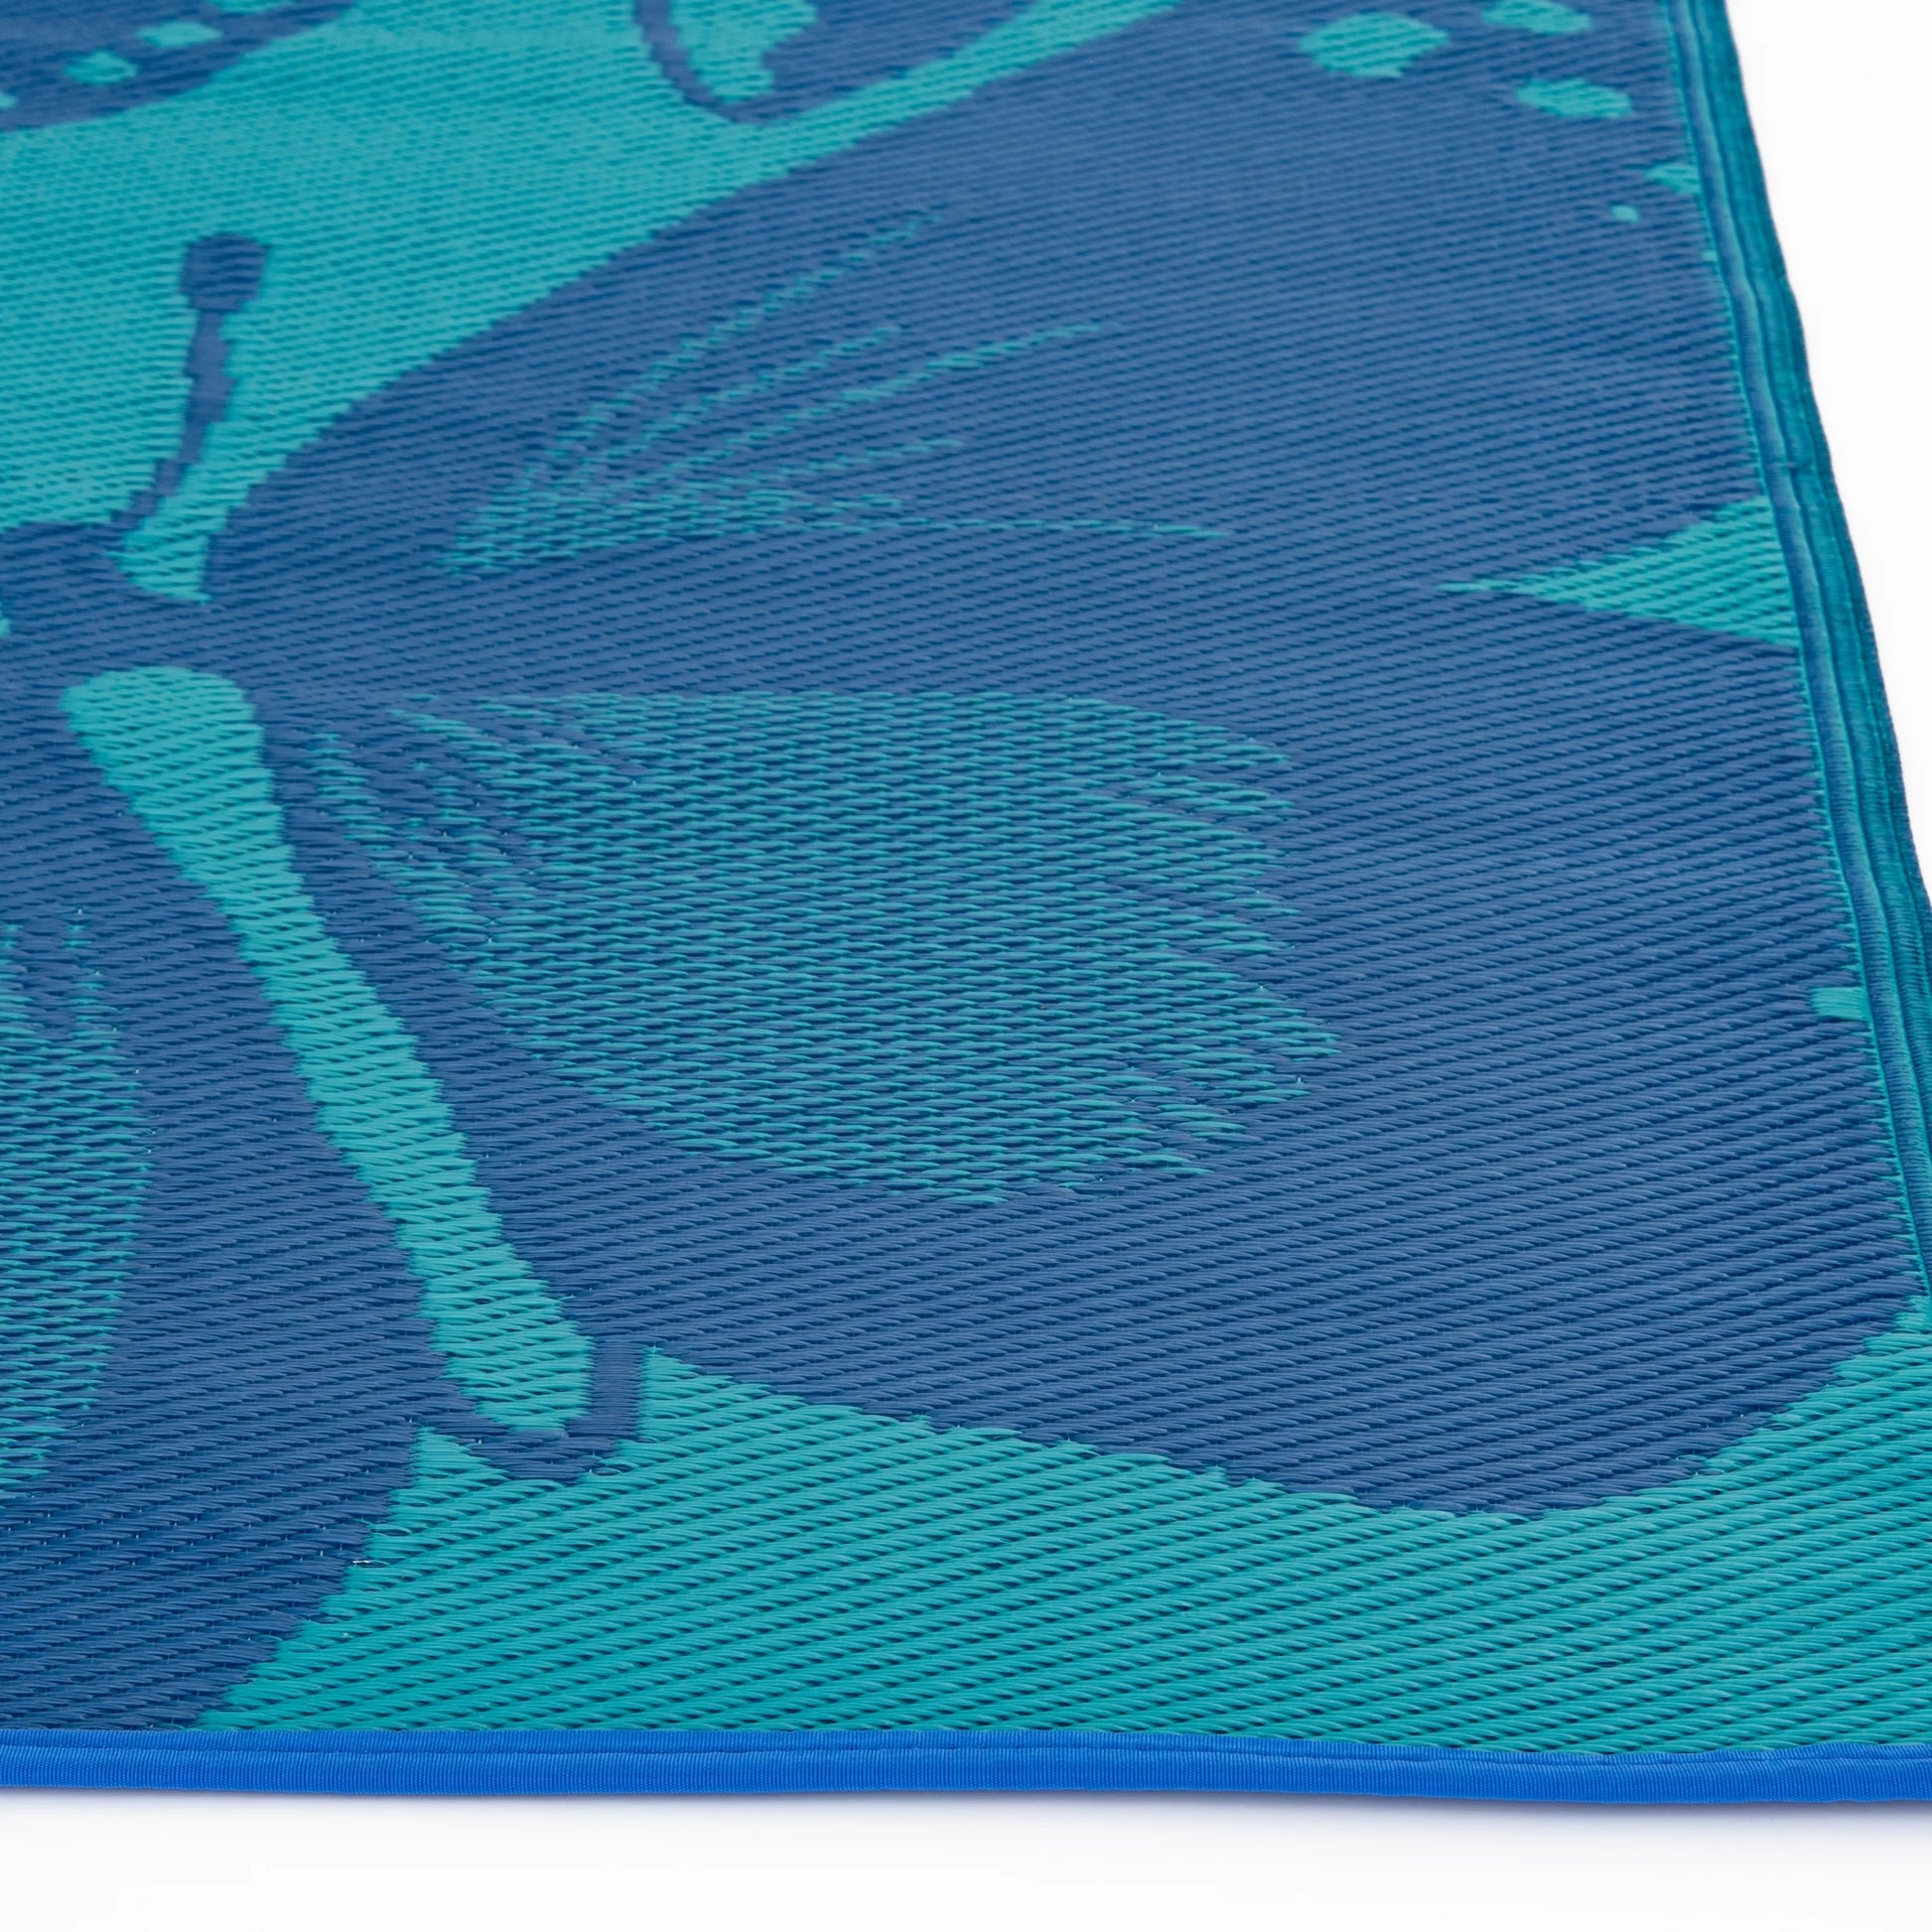 5' X 7' Blue Butterfly Reversible Outdoor Rug